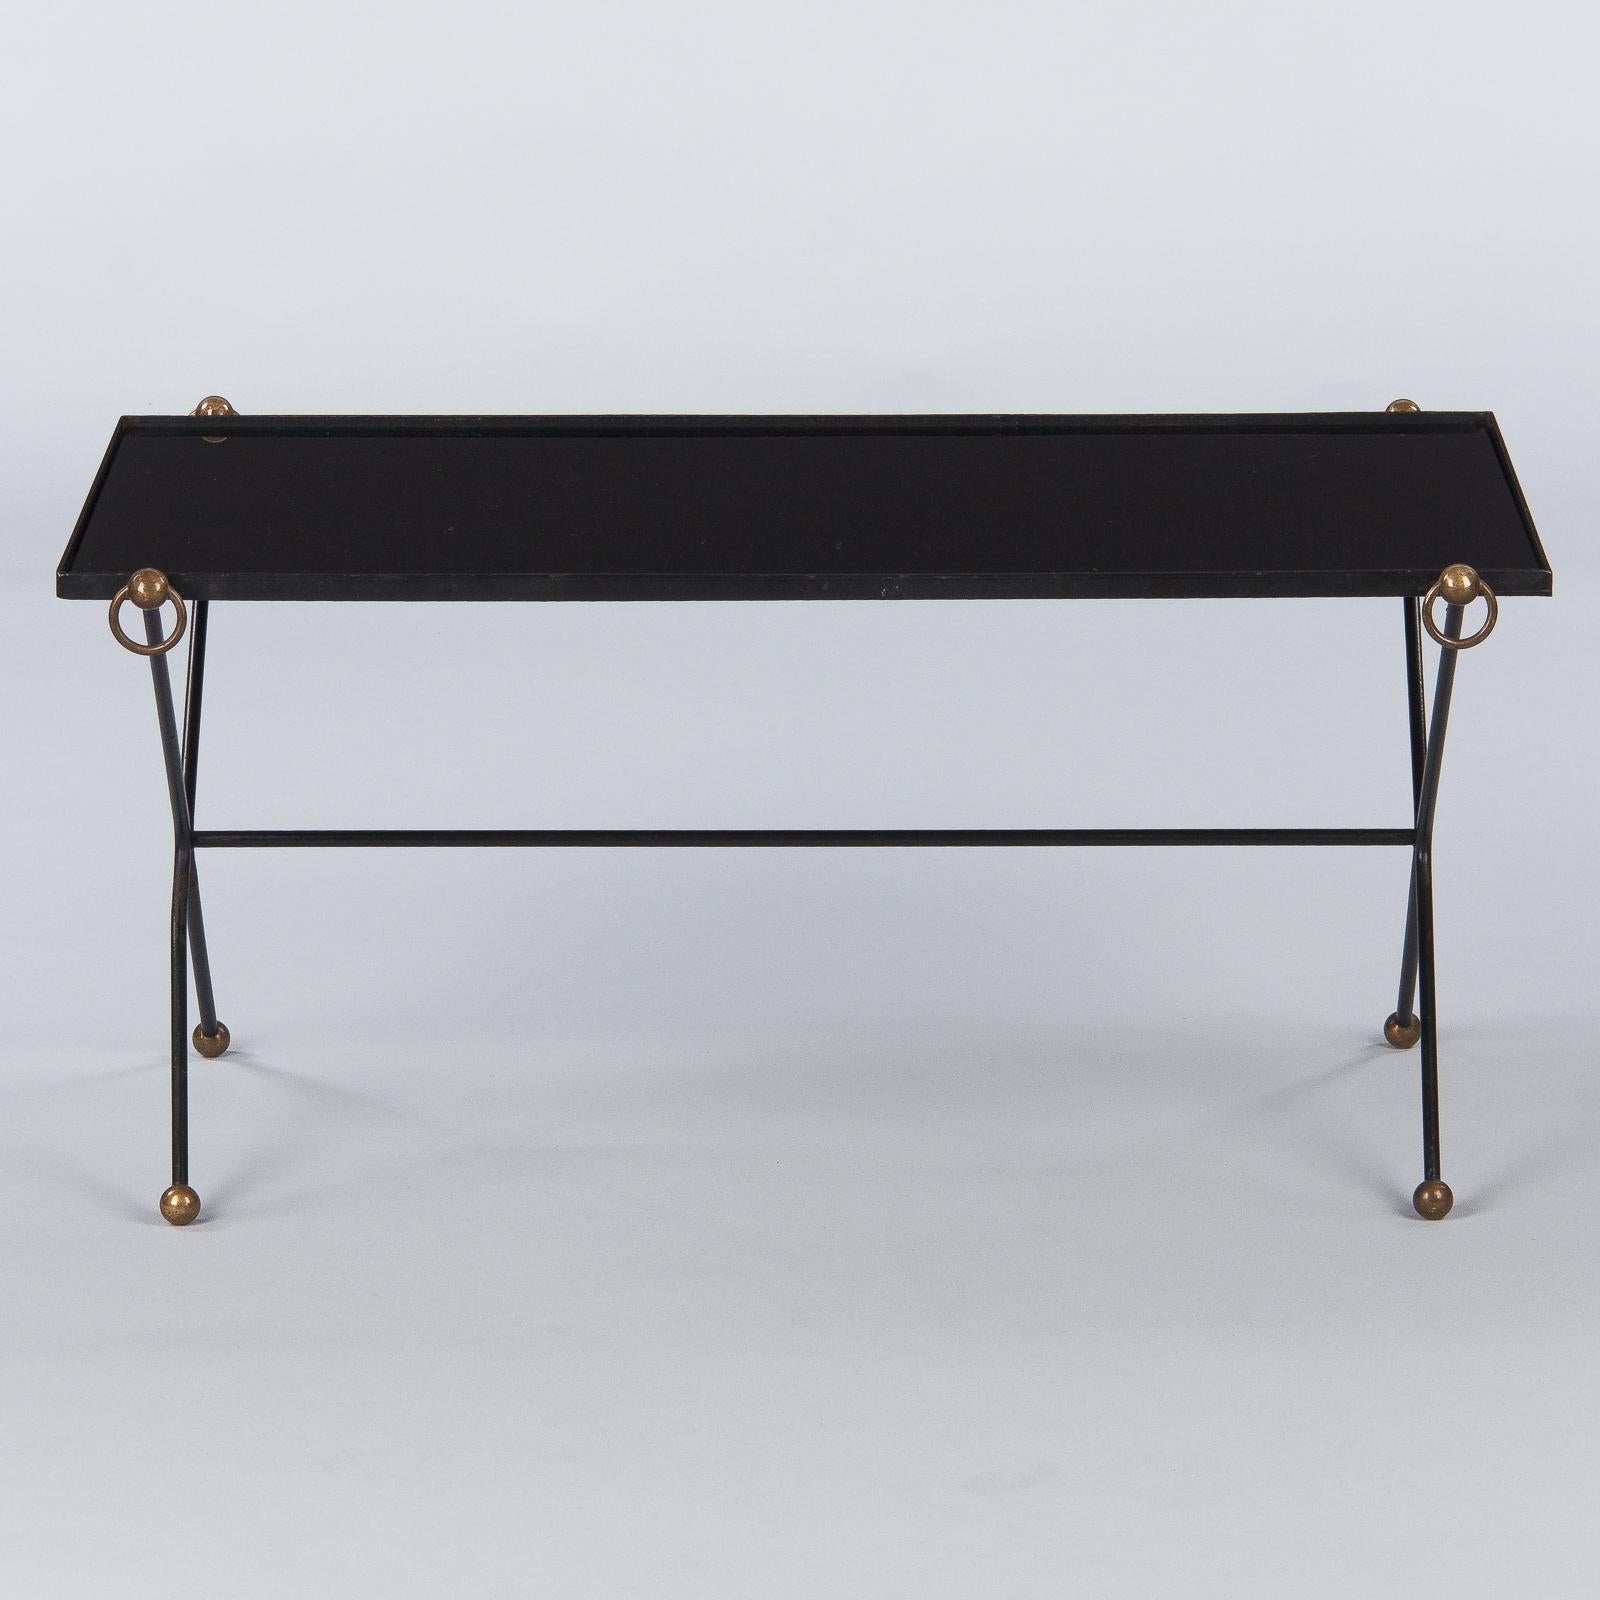 Mid-Century Modern French Iron Coffee Table Attributed to Jacques Adnet, 1950s